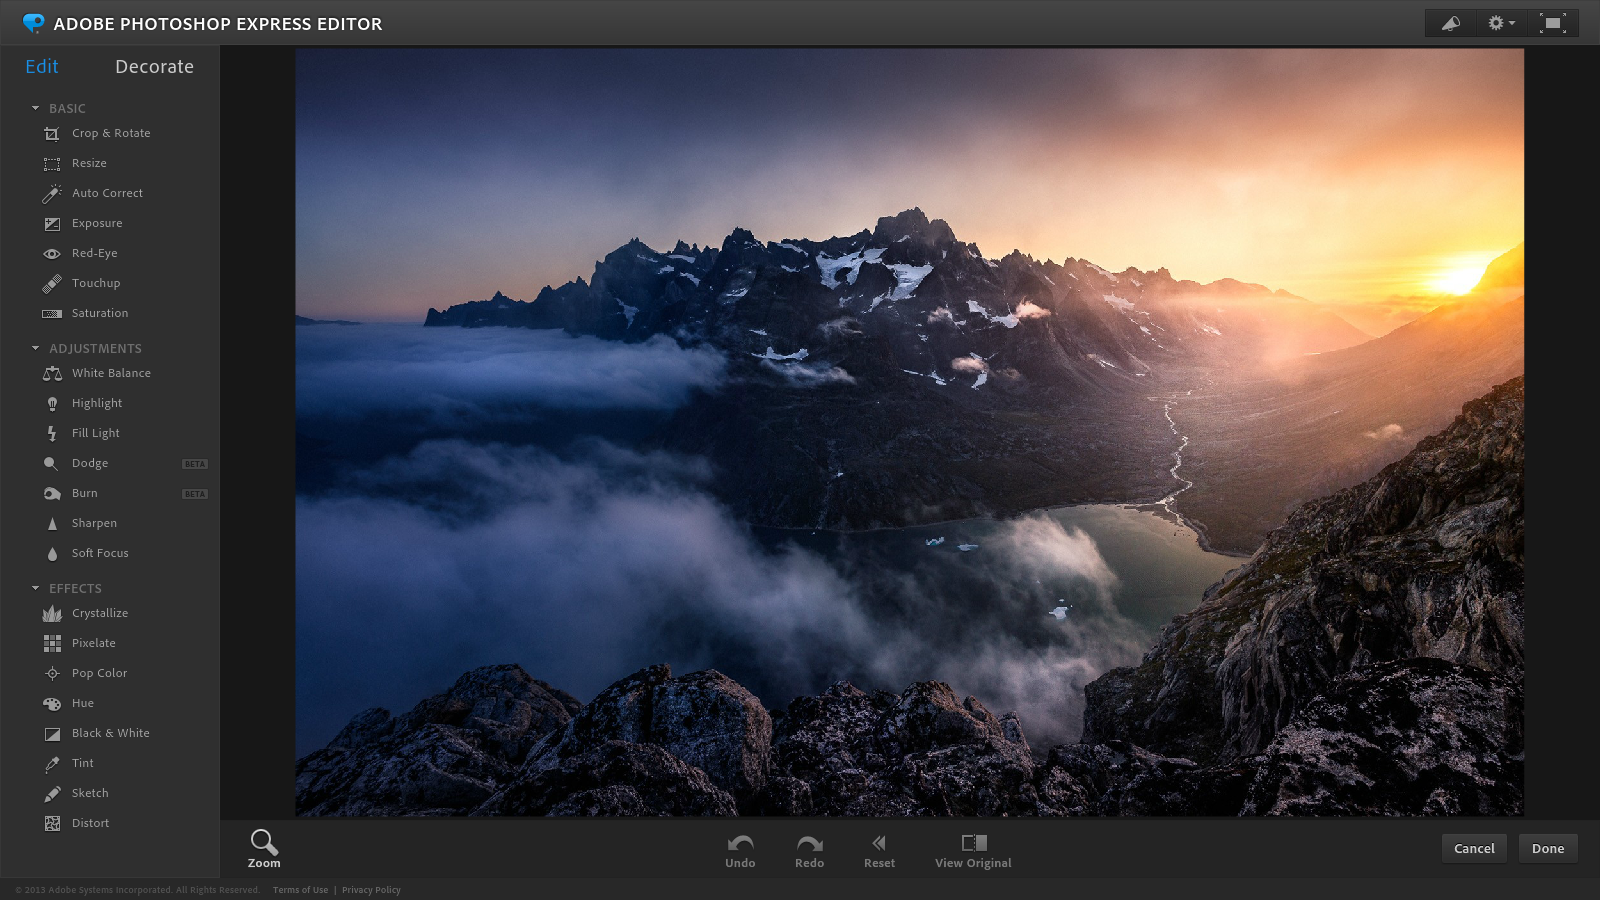 Adobe Photoshop Express is among the best photo editors